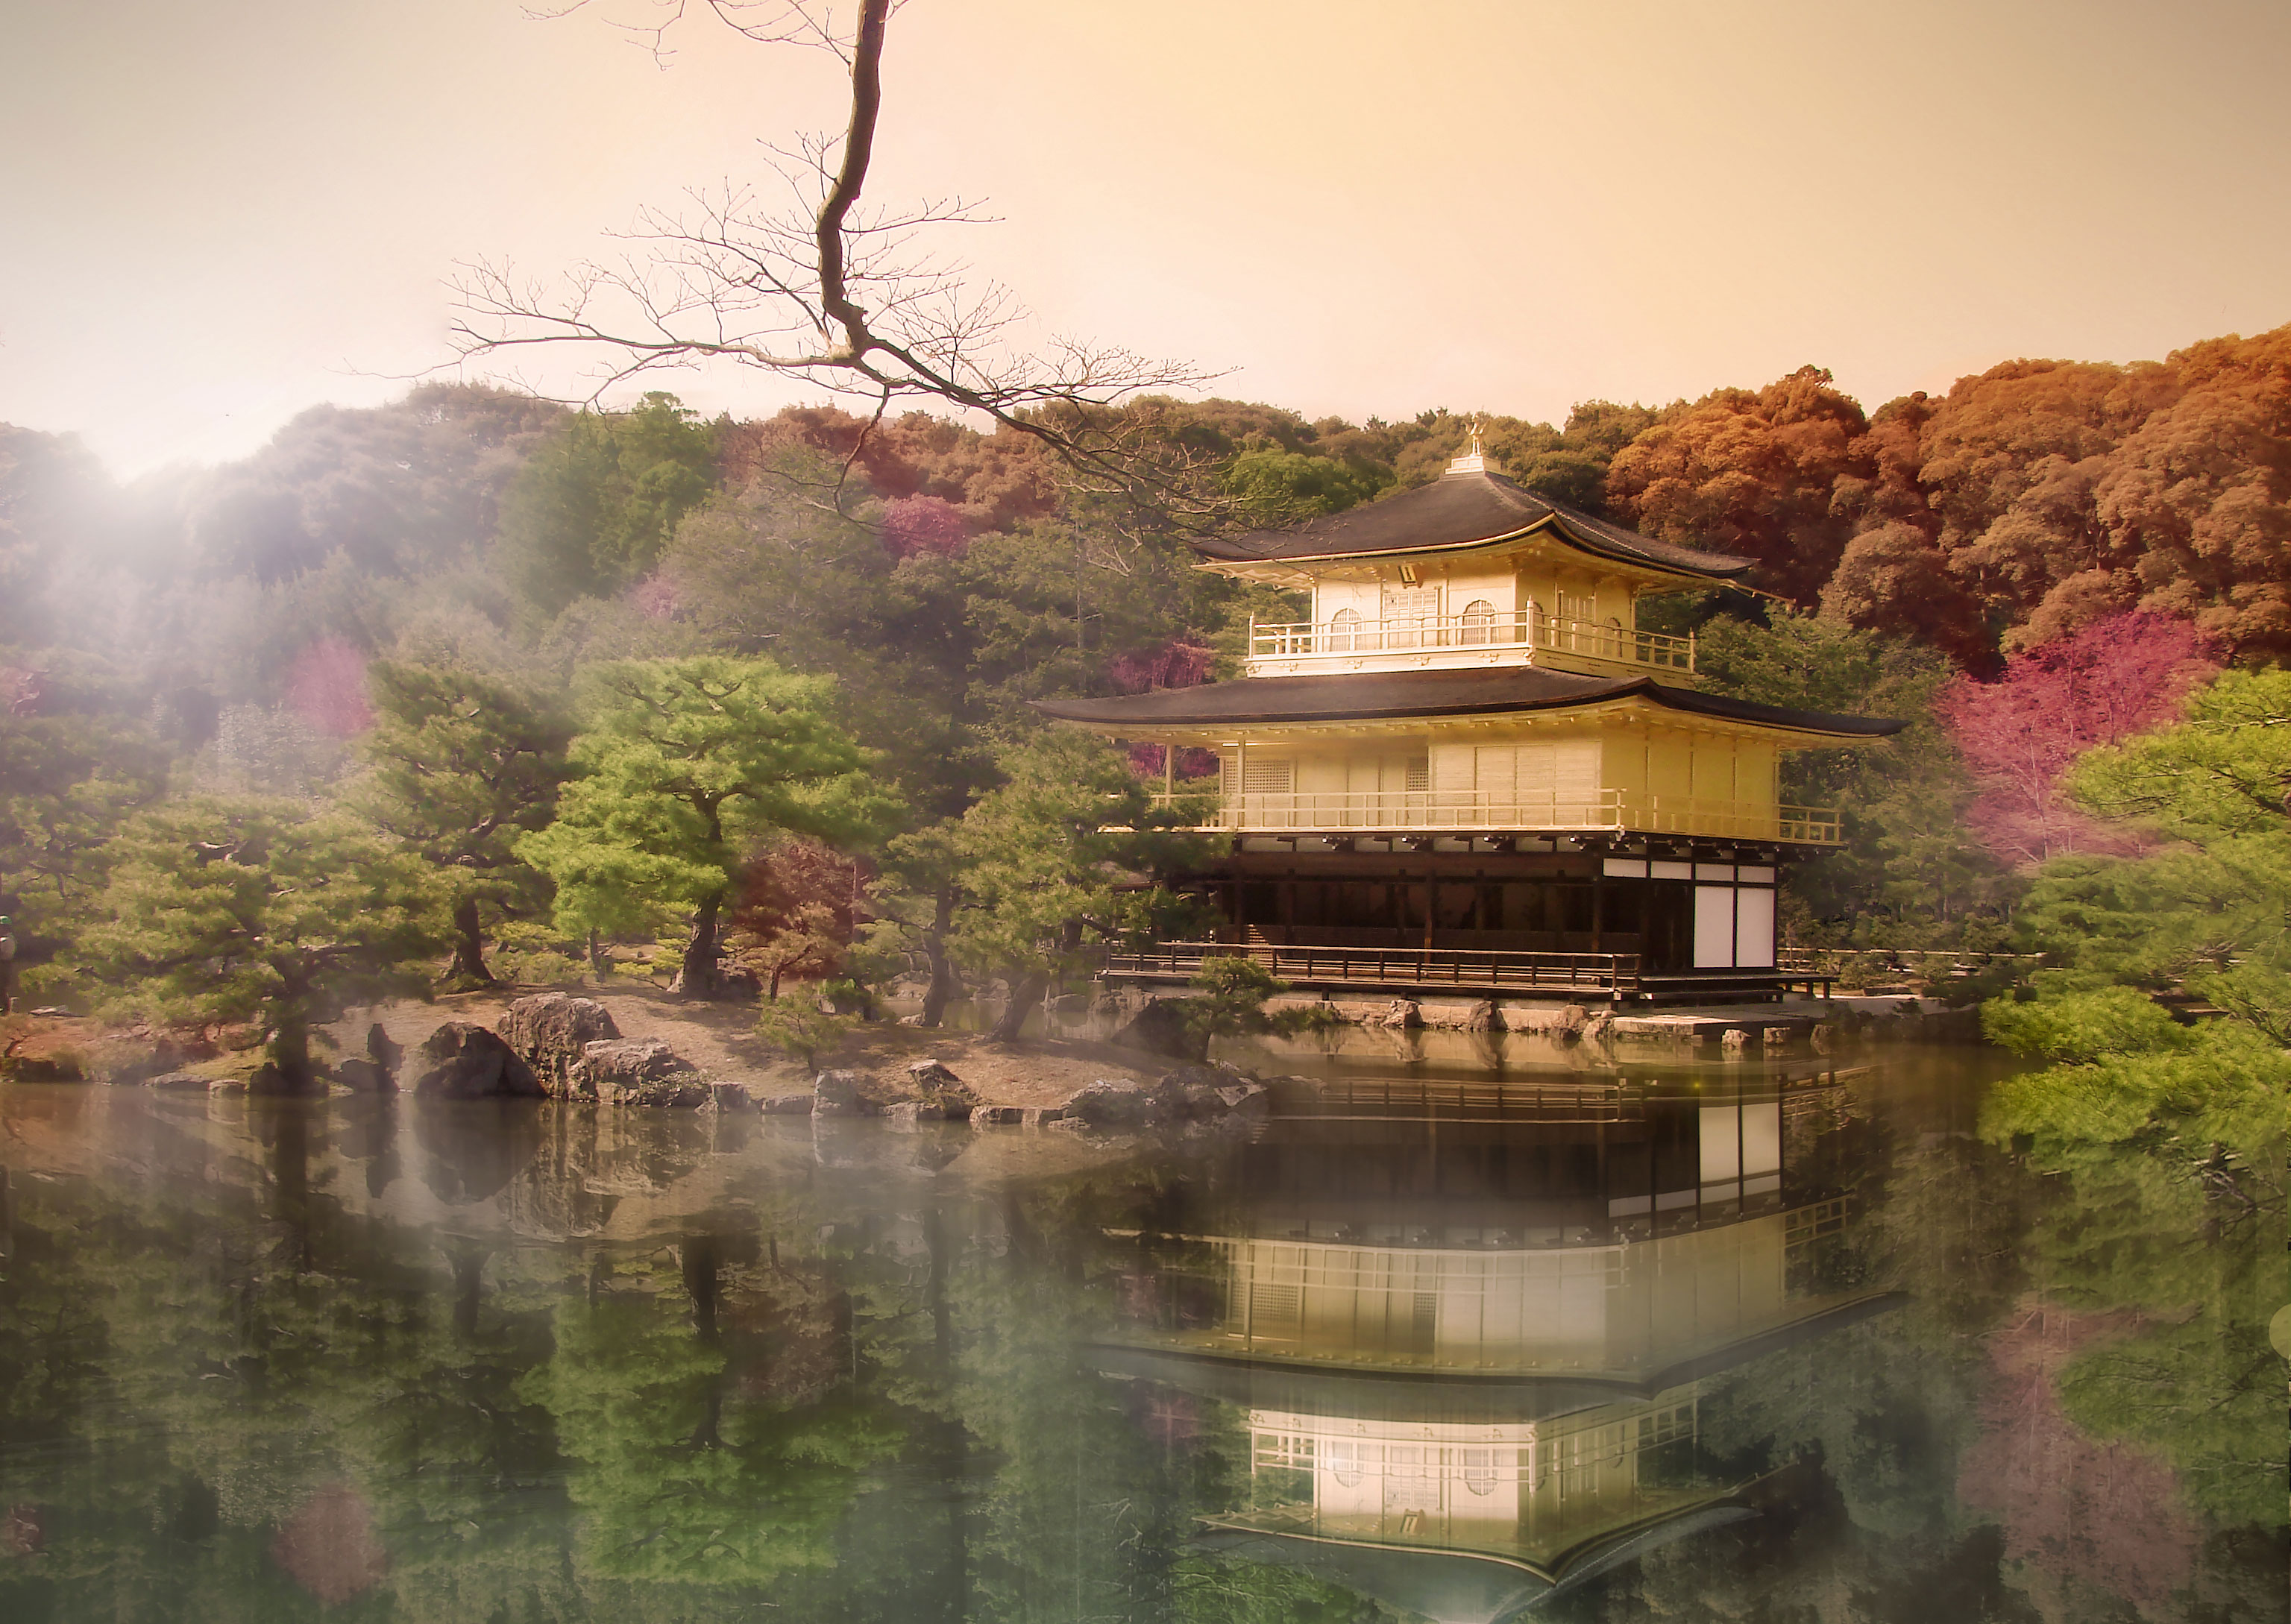 The Golden Pavilion of Kyoto or the Deer Garden Temple of Kyoto by sunset and nice color of the nature around, (Nos Dren)